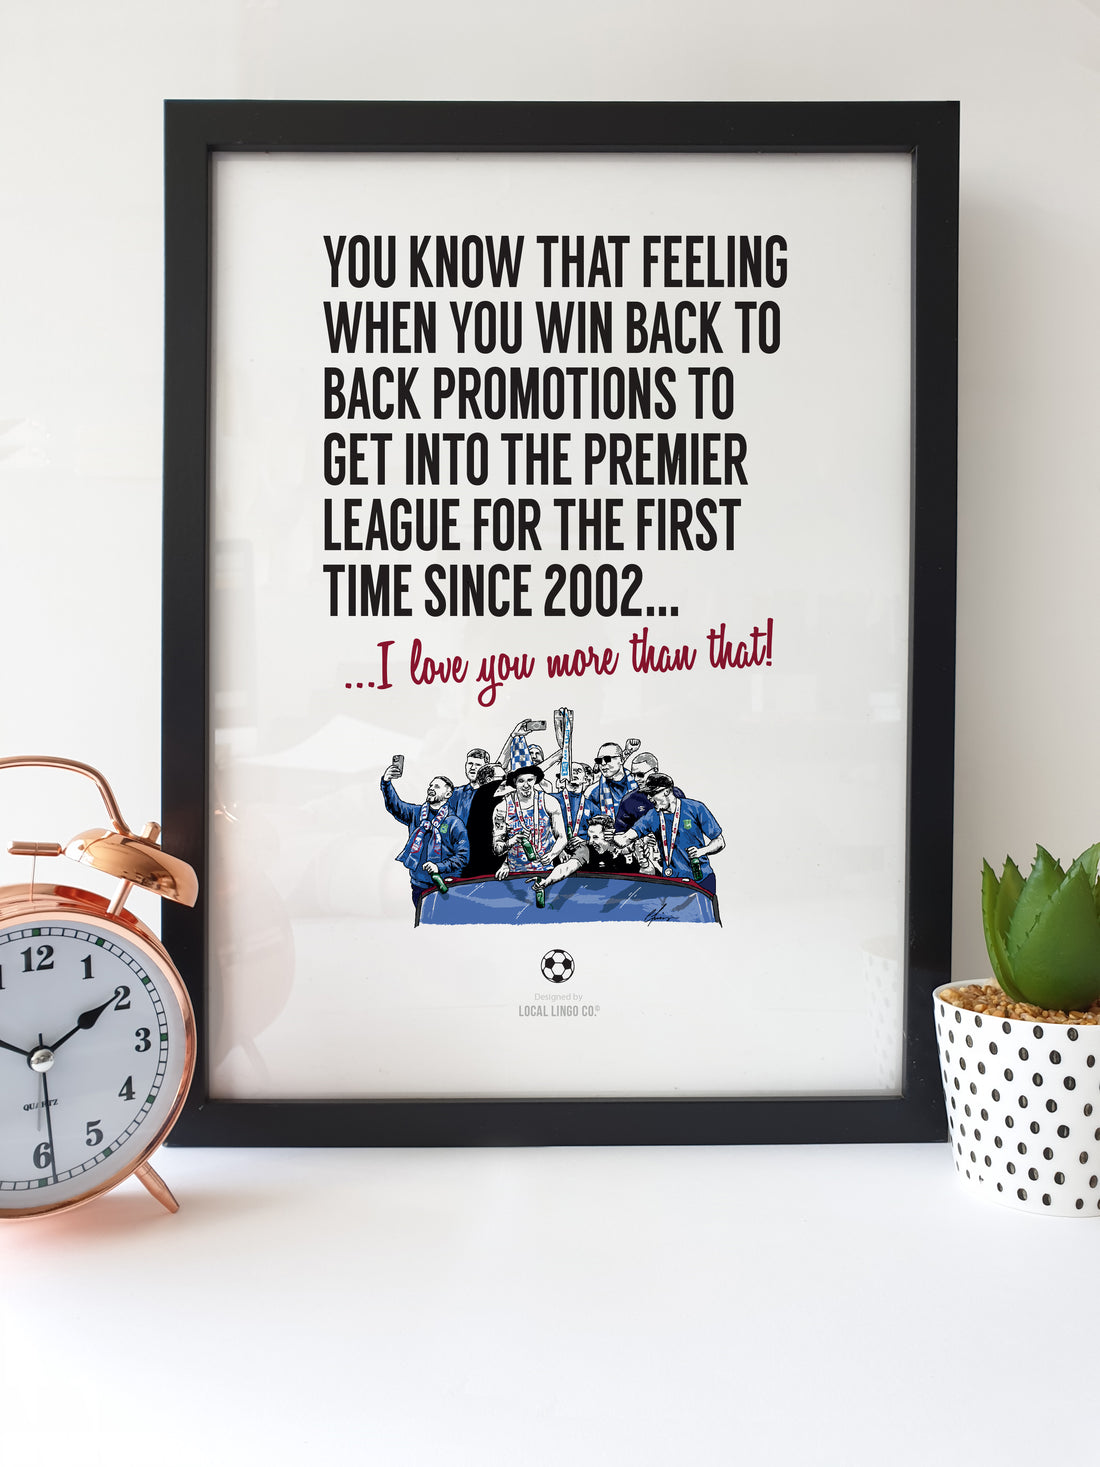 Framed print of Ipswich Town football team celebrating back-to-back promotions to the Premier League, with text expressing love greater than their triumph, designed by Local Lingo.